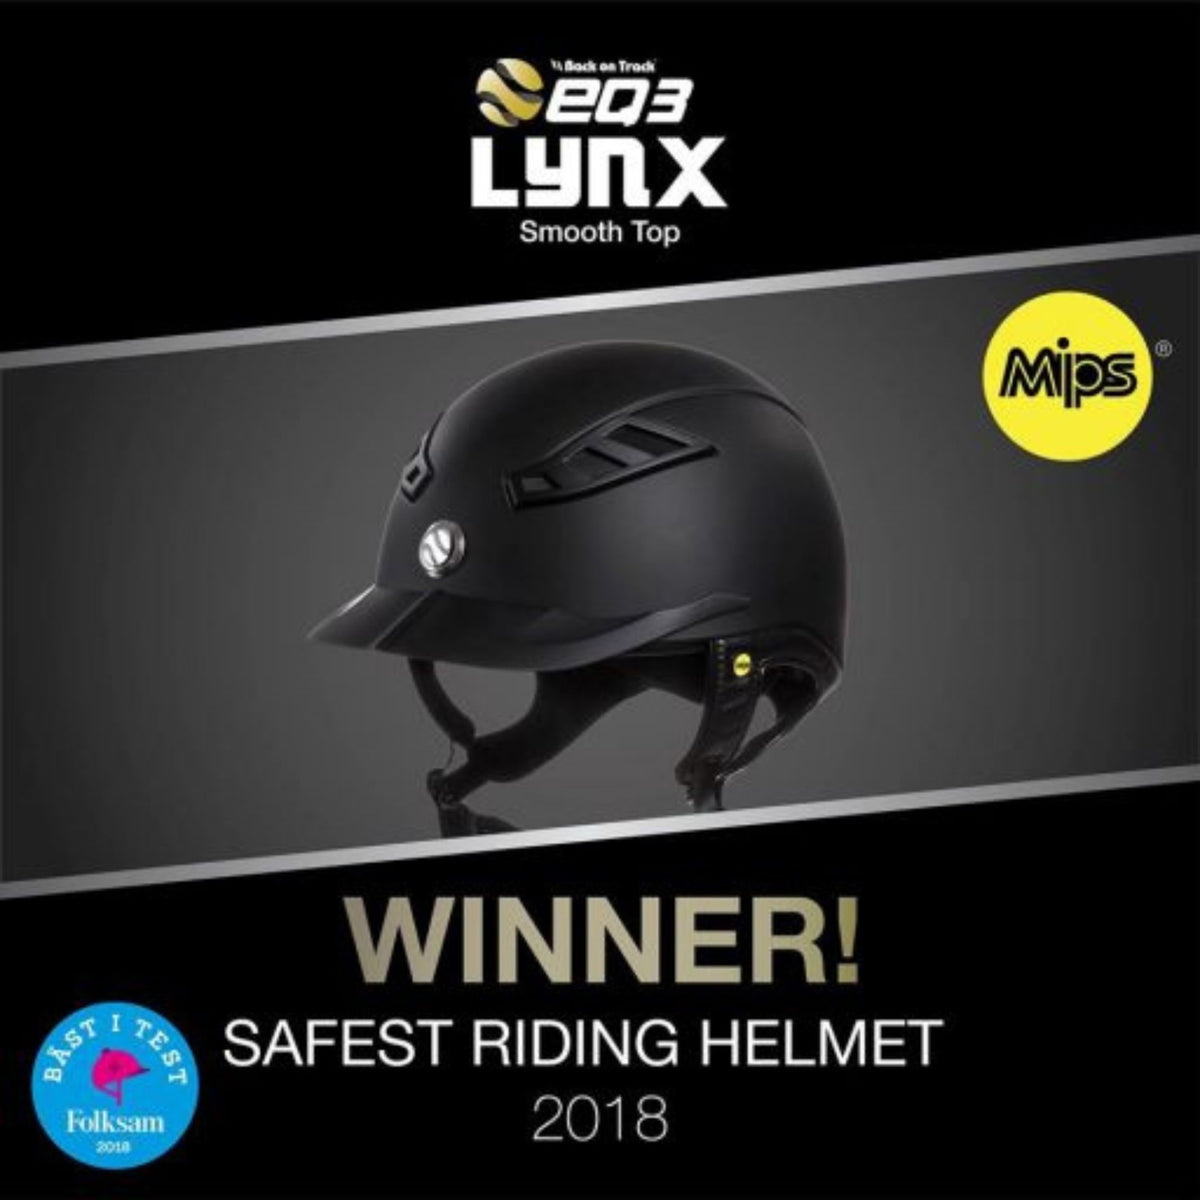 Lynx safest riding helmet award, with image of horse and Mips logo.